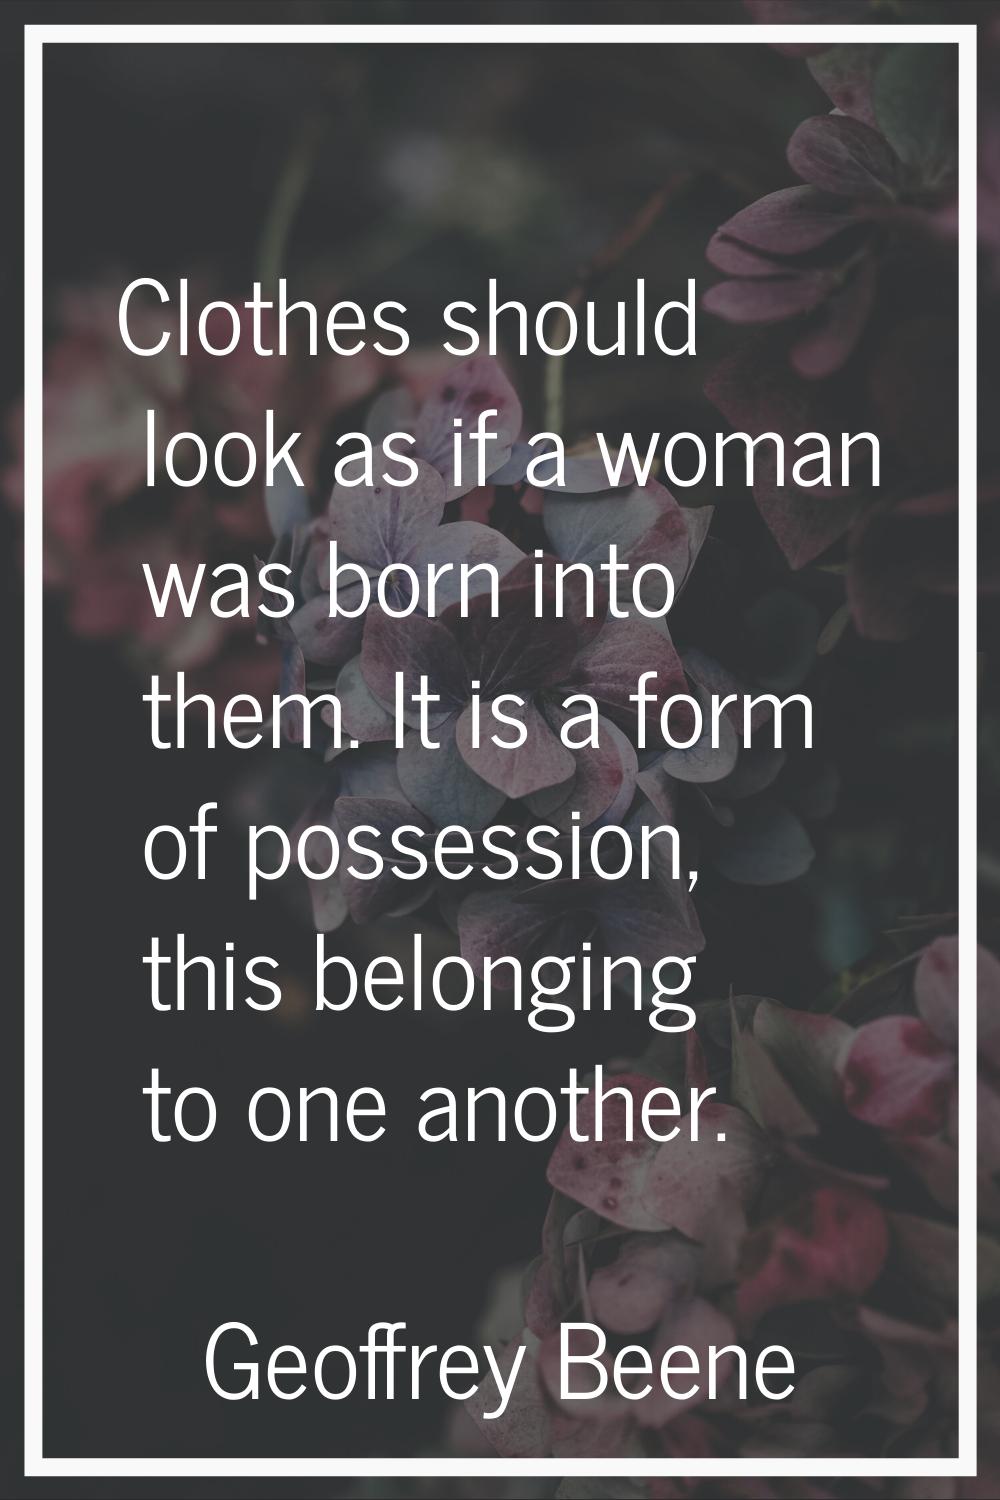 Clothes should look as if a woman was born into them. It is a form of possession, this belonging to